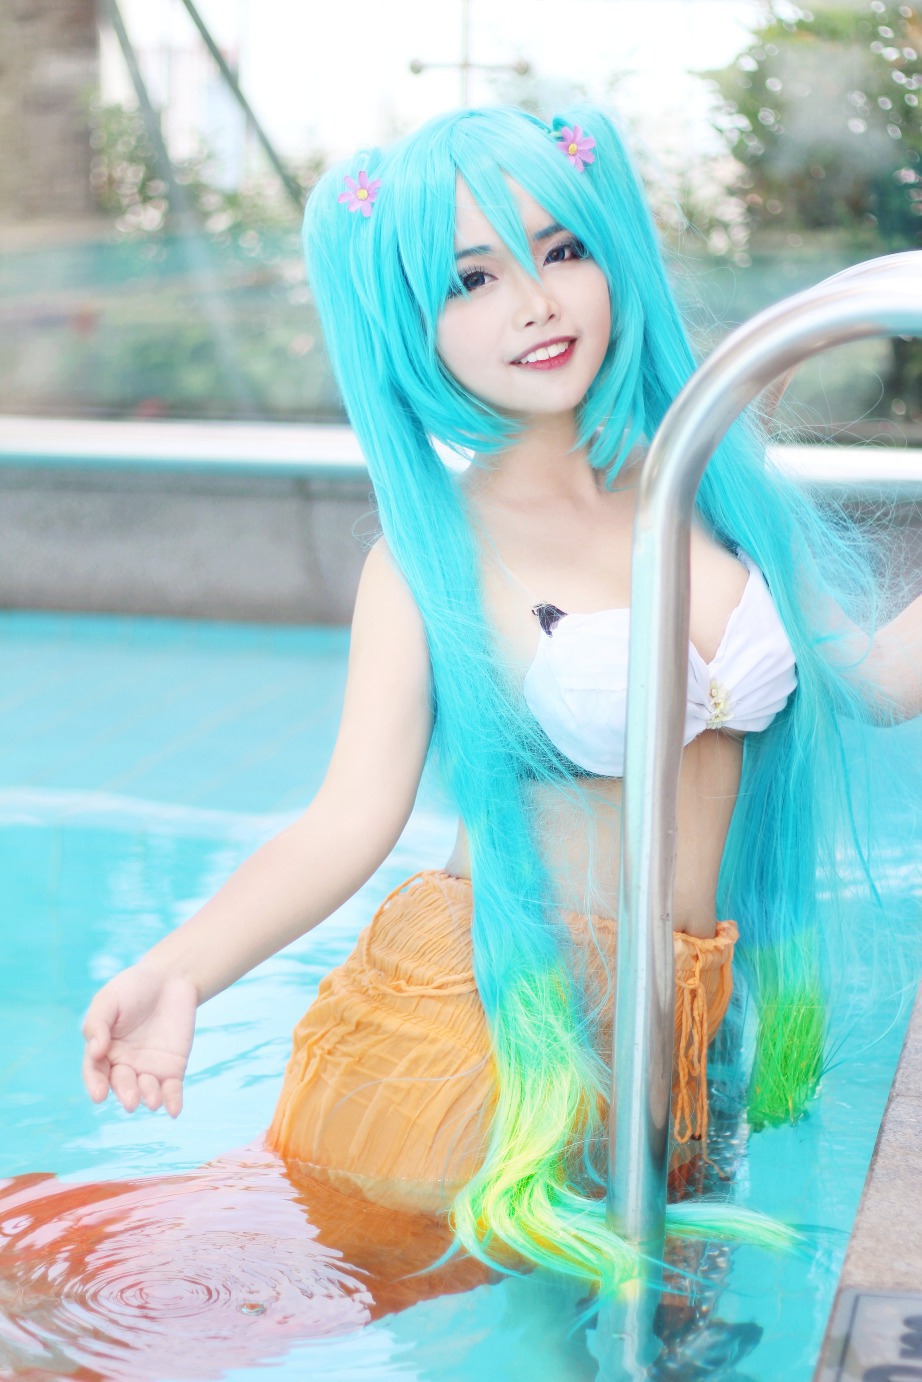 Sona Pool Party - Autumn(Surin) Sona Pool Party コ ス プ レ 写 真 - WorldCosplay....